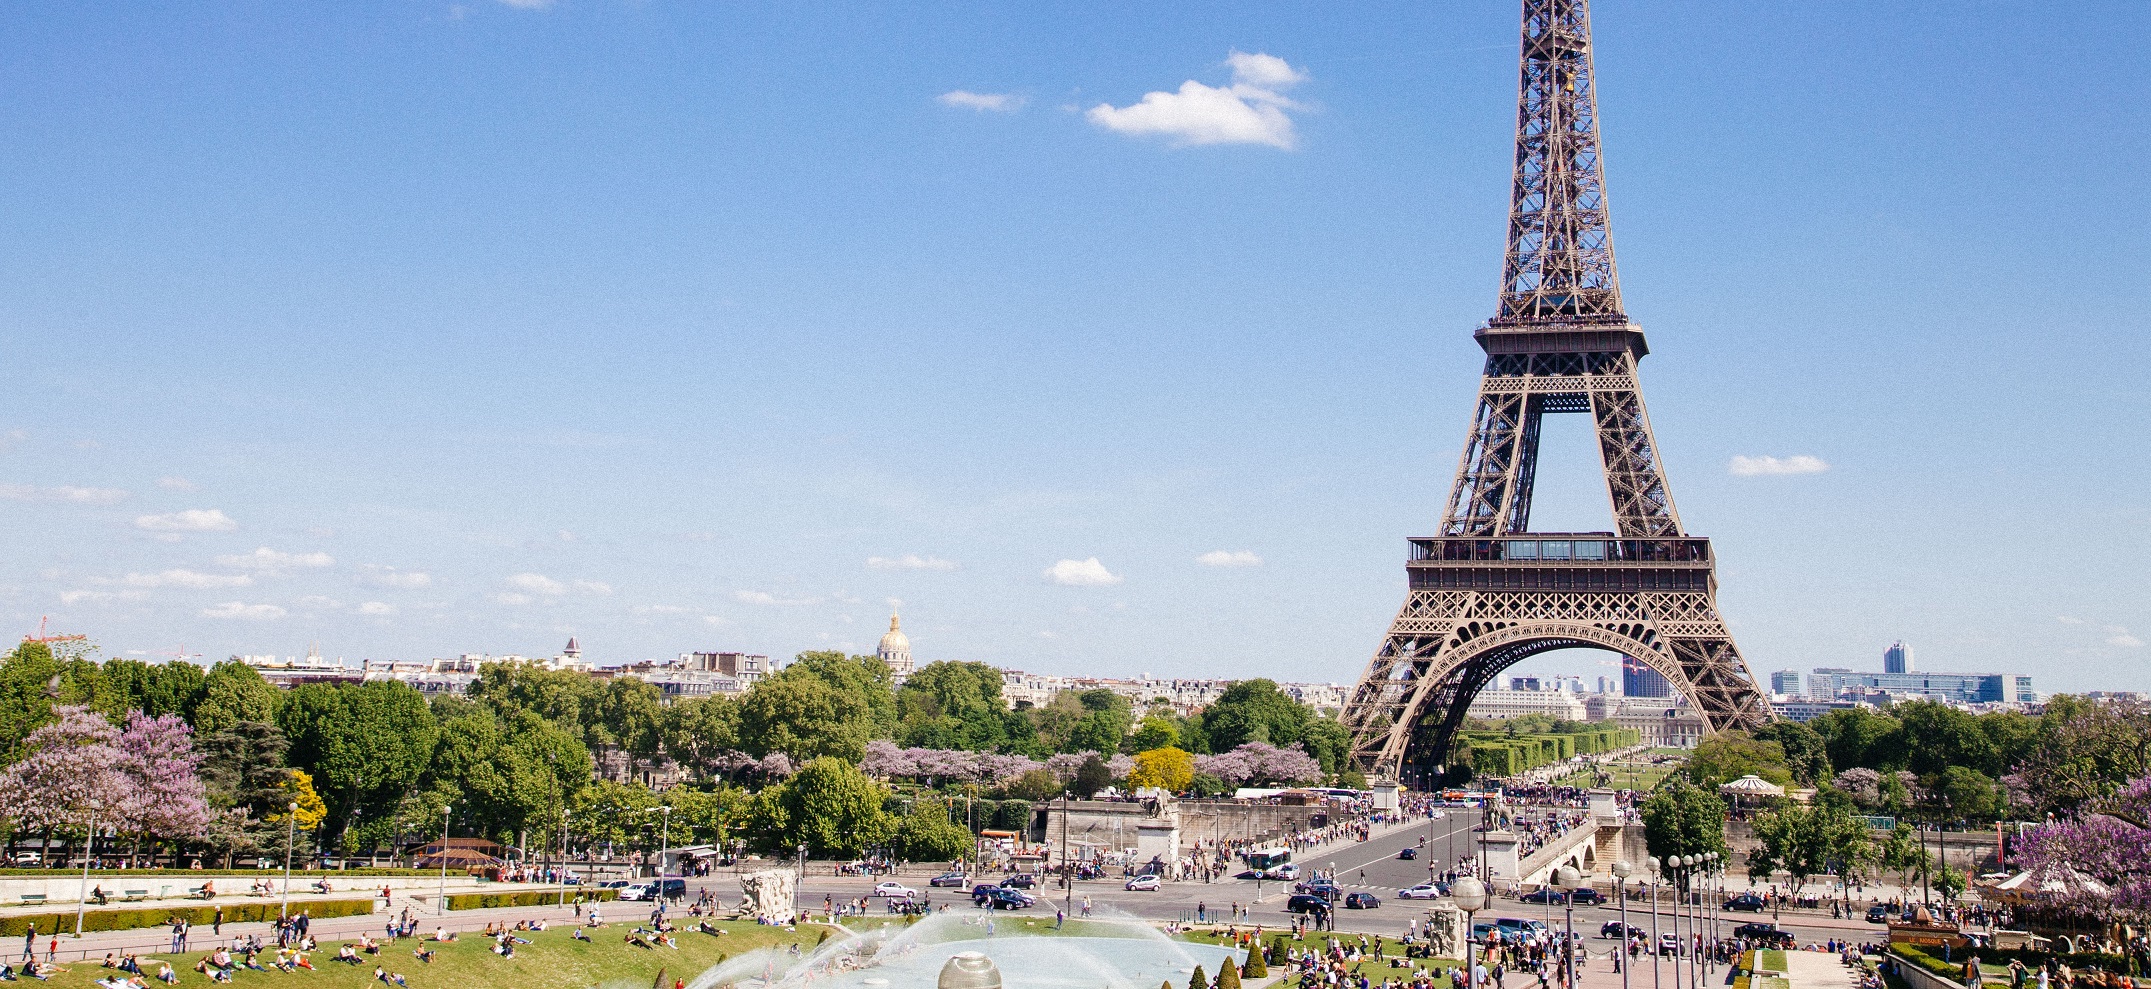 Things You Should Know Before Visiting Paris